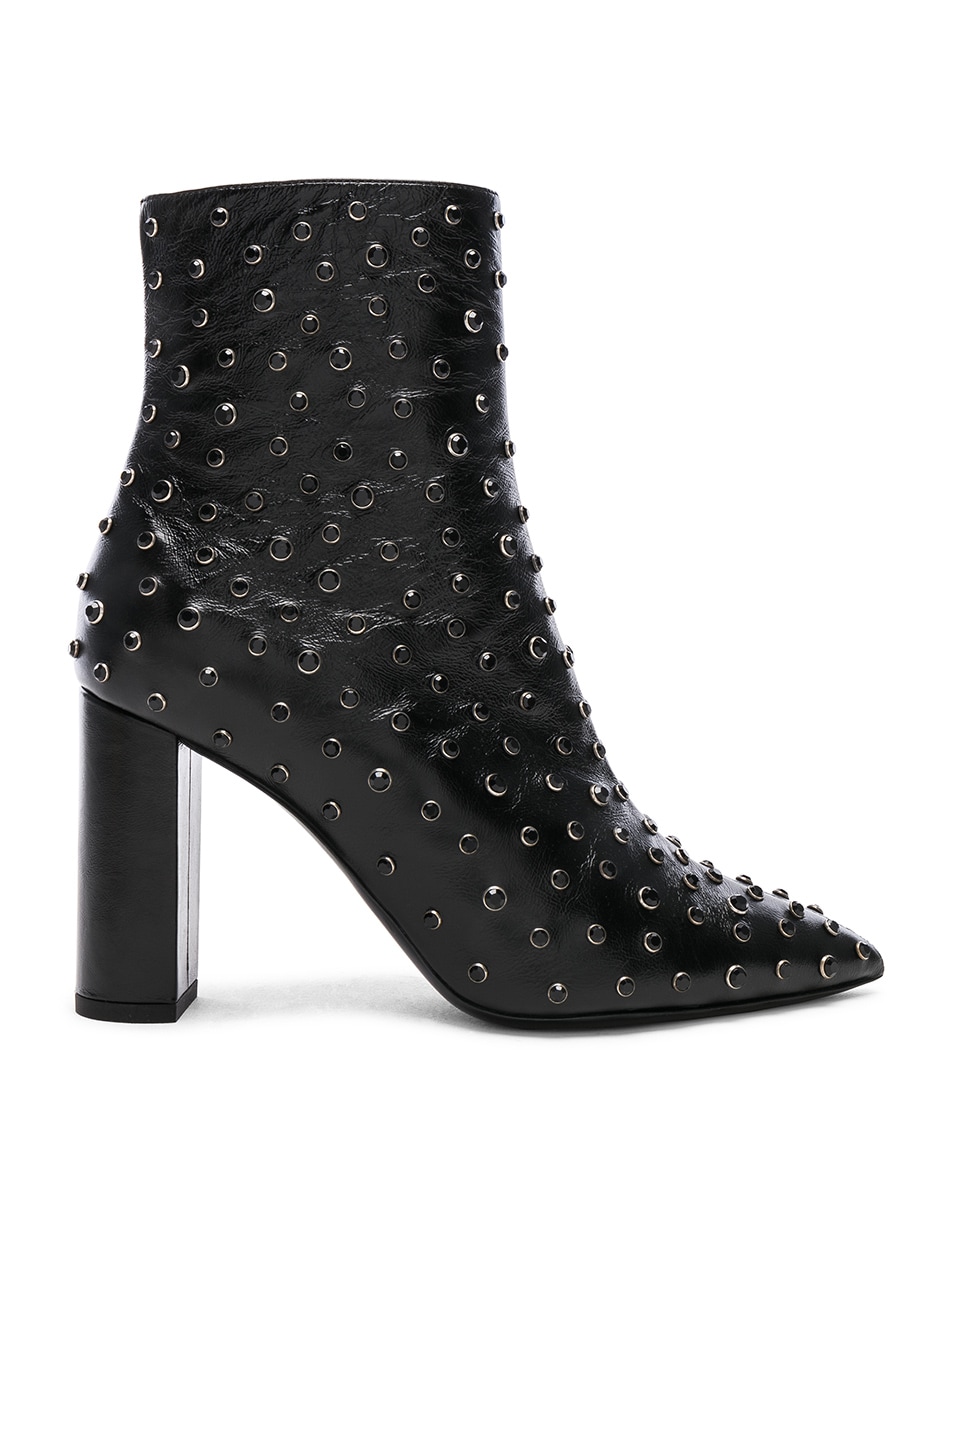 Saint Laurent Betty Crystal Embellished Leather Heeled Ankle Boots in ...